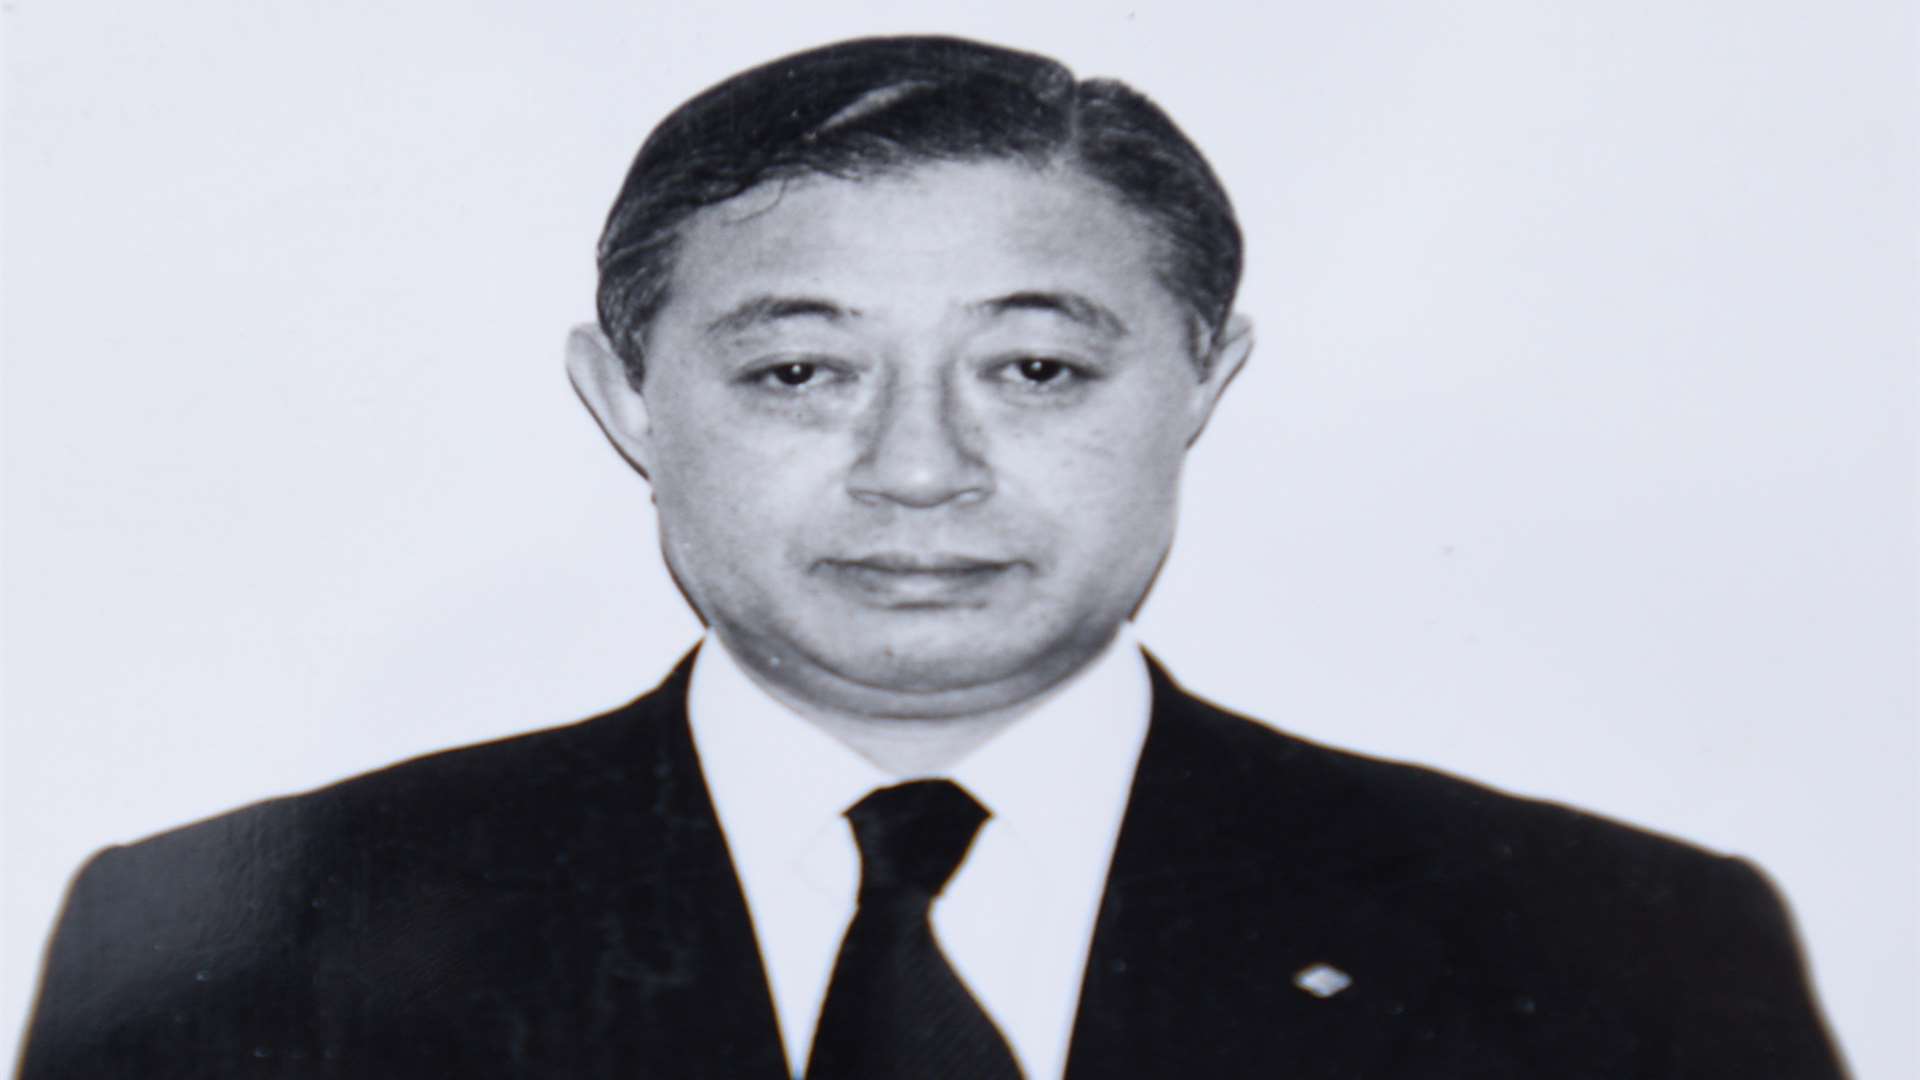 Aki died in the Japan Airlines crash in the 1980s